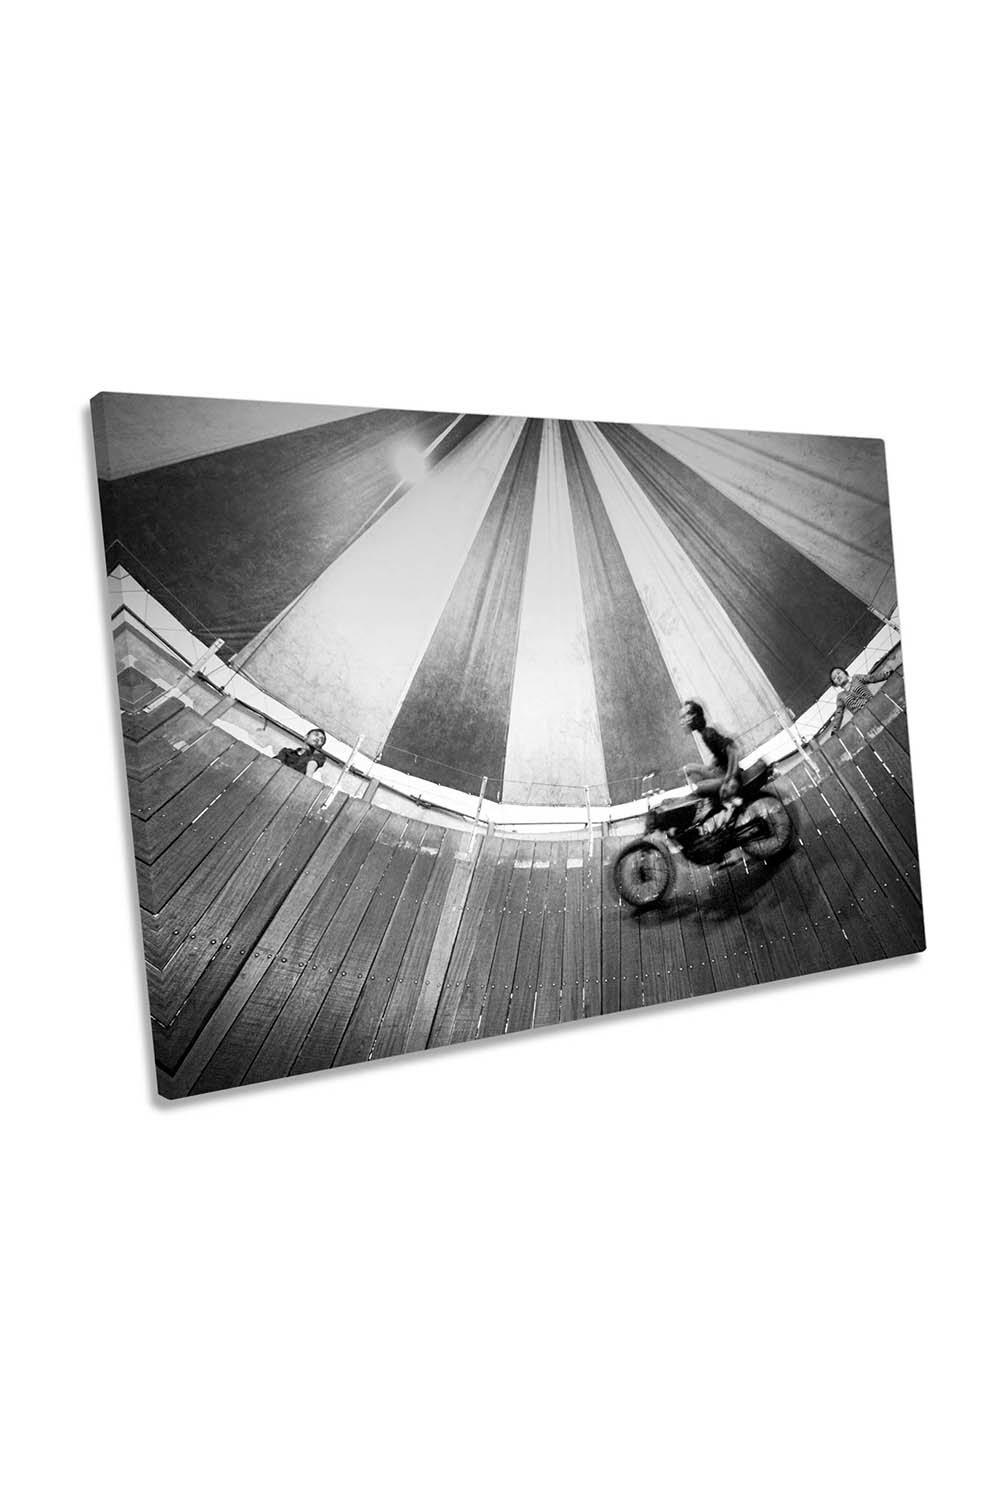 Daredevil Wall of Death Motorcycle Canvas Wall Art Picture Print